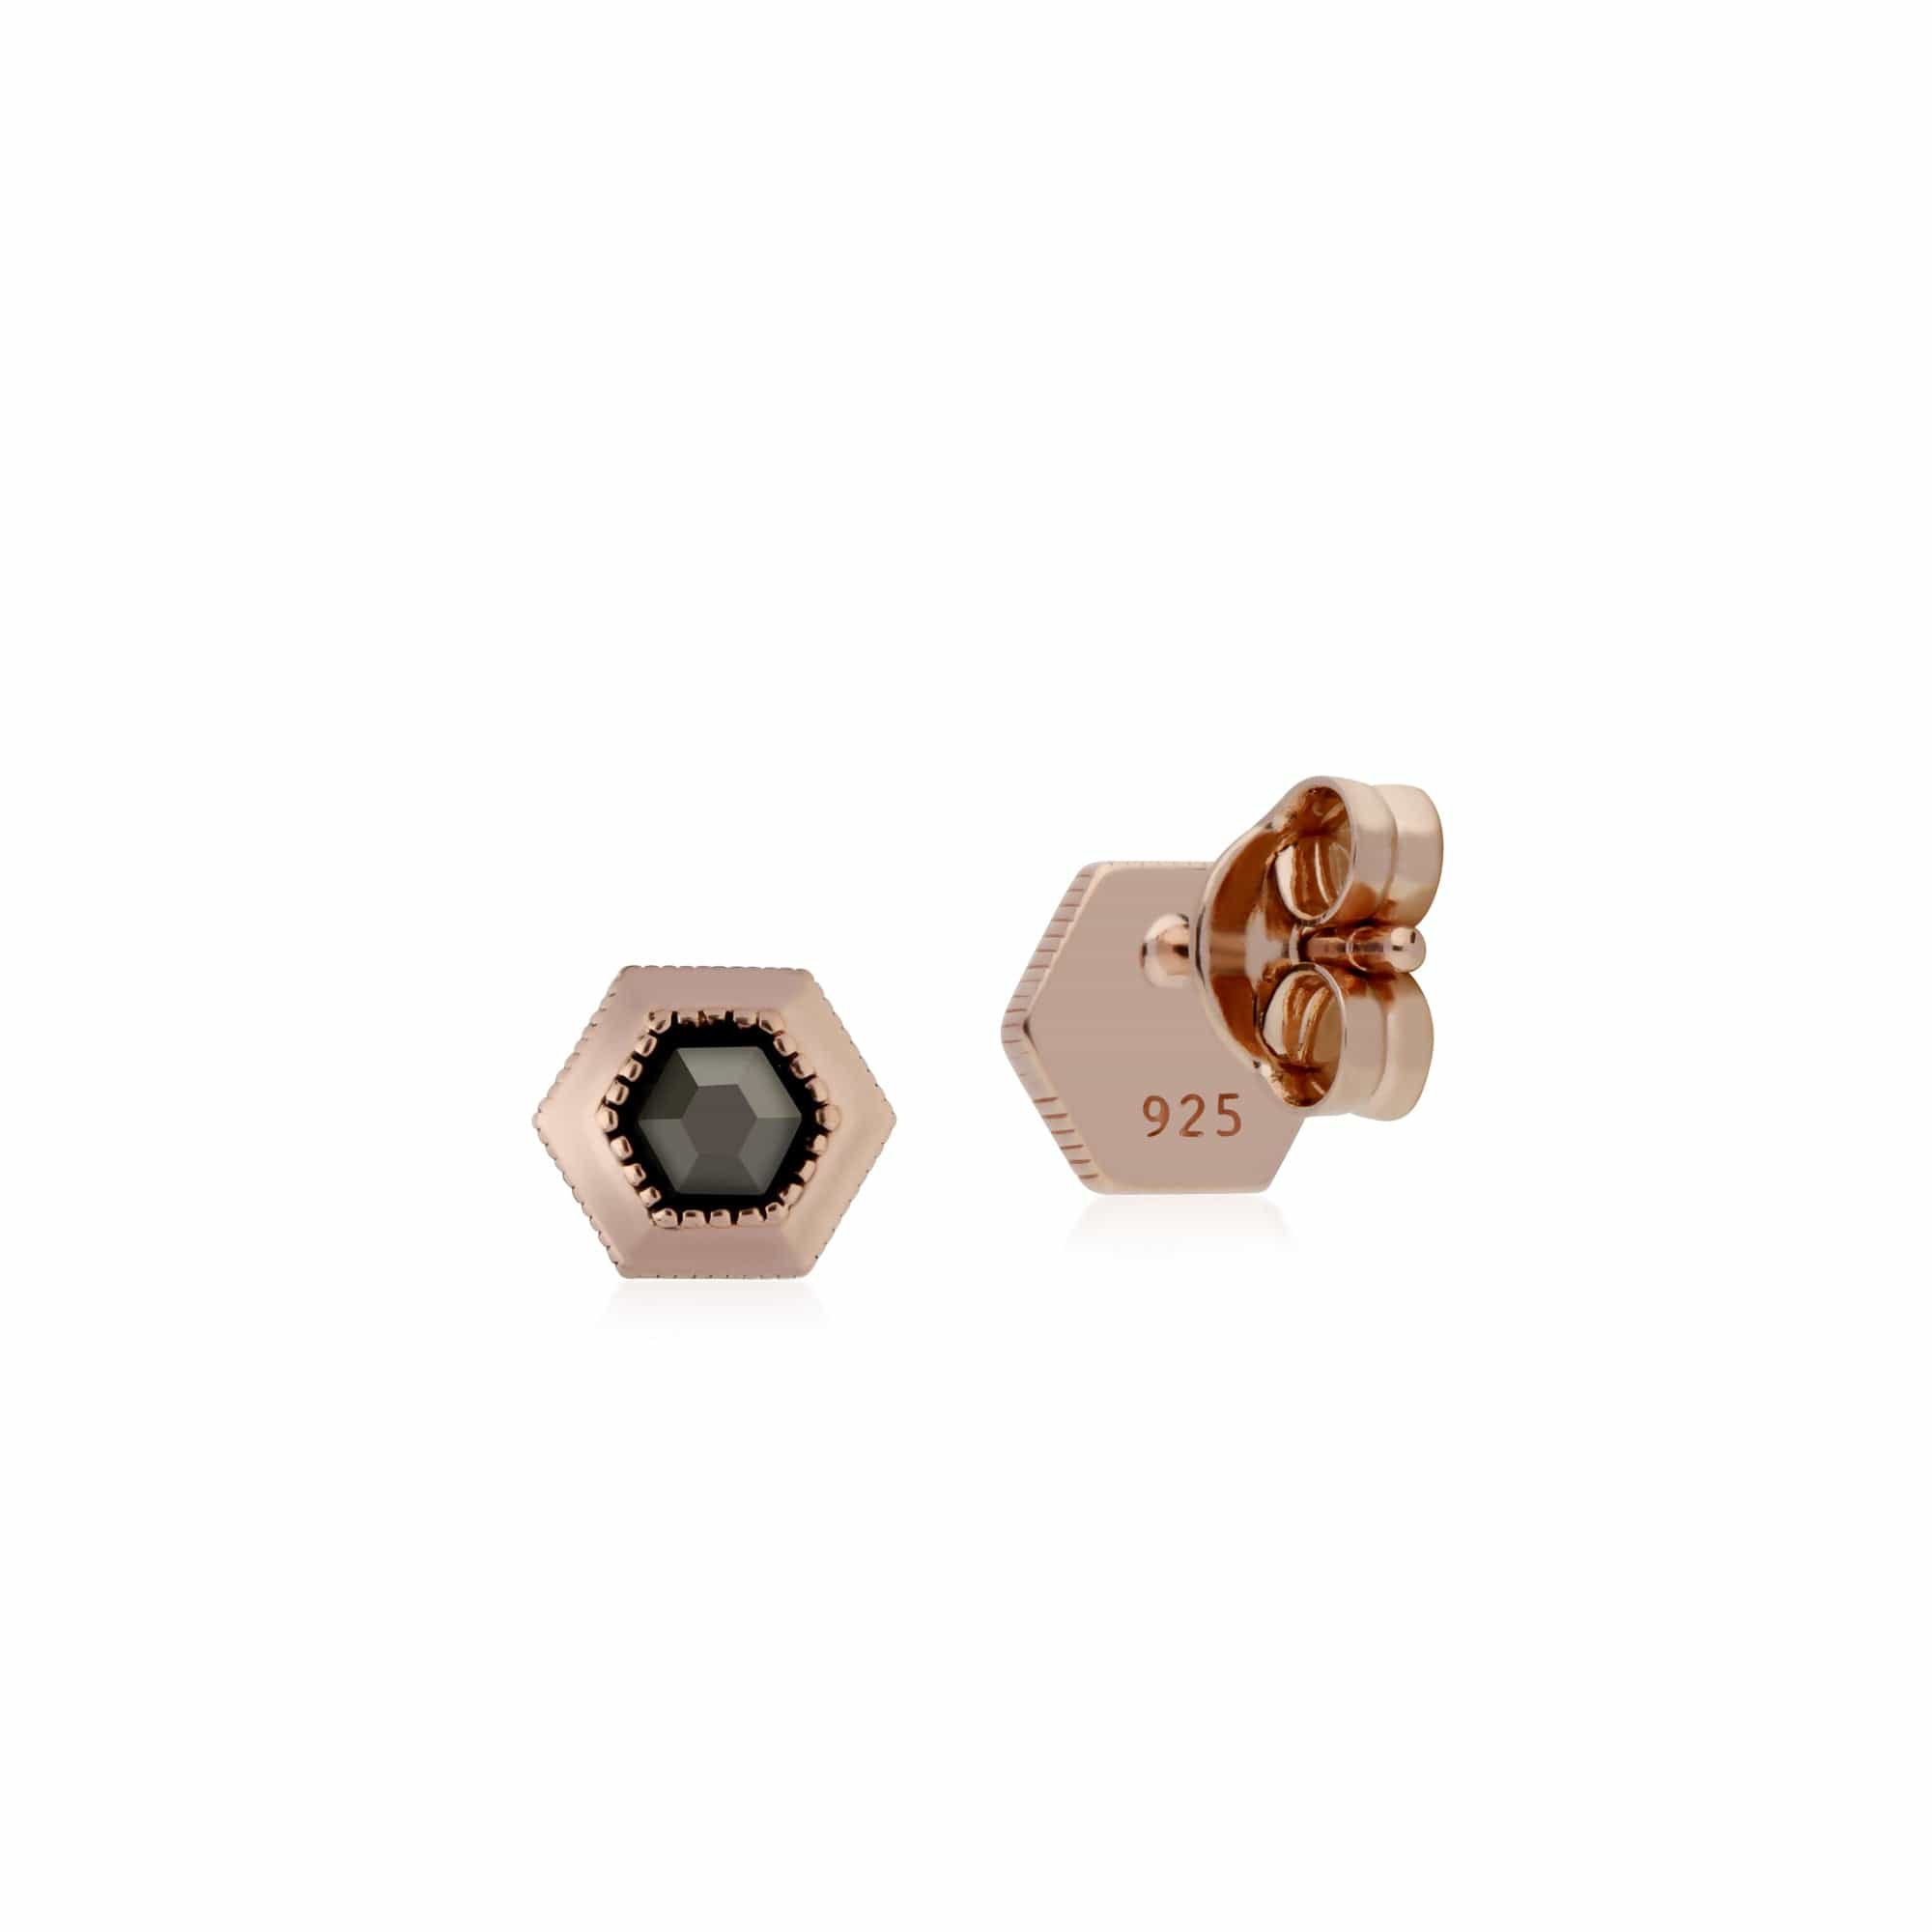 224E022601925 Rose Gold Plated Hexagon Marcasite Stud Earrings in 925 Sterling Silver 2